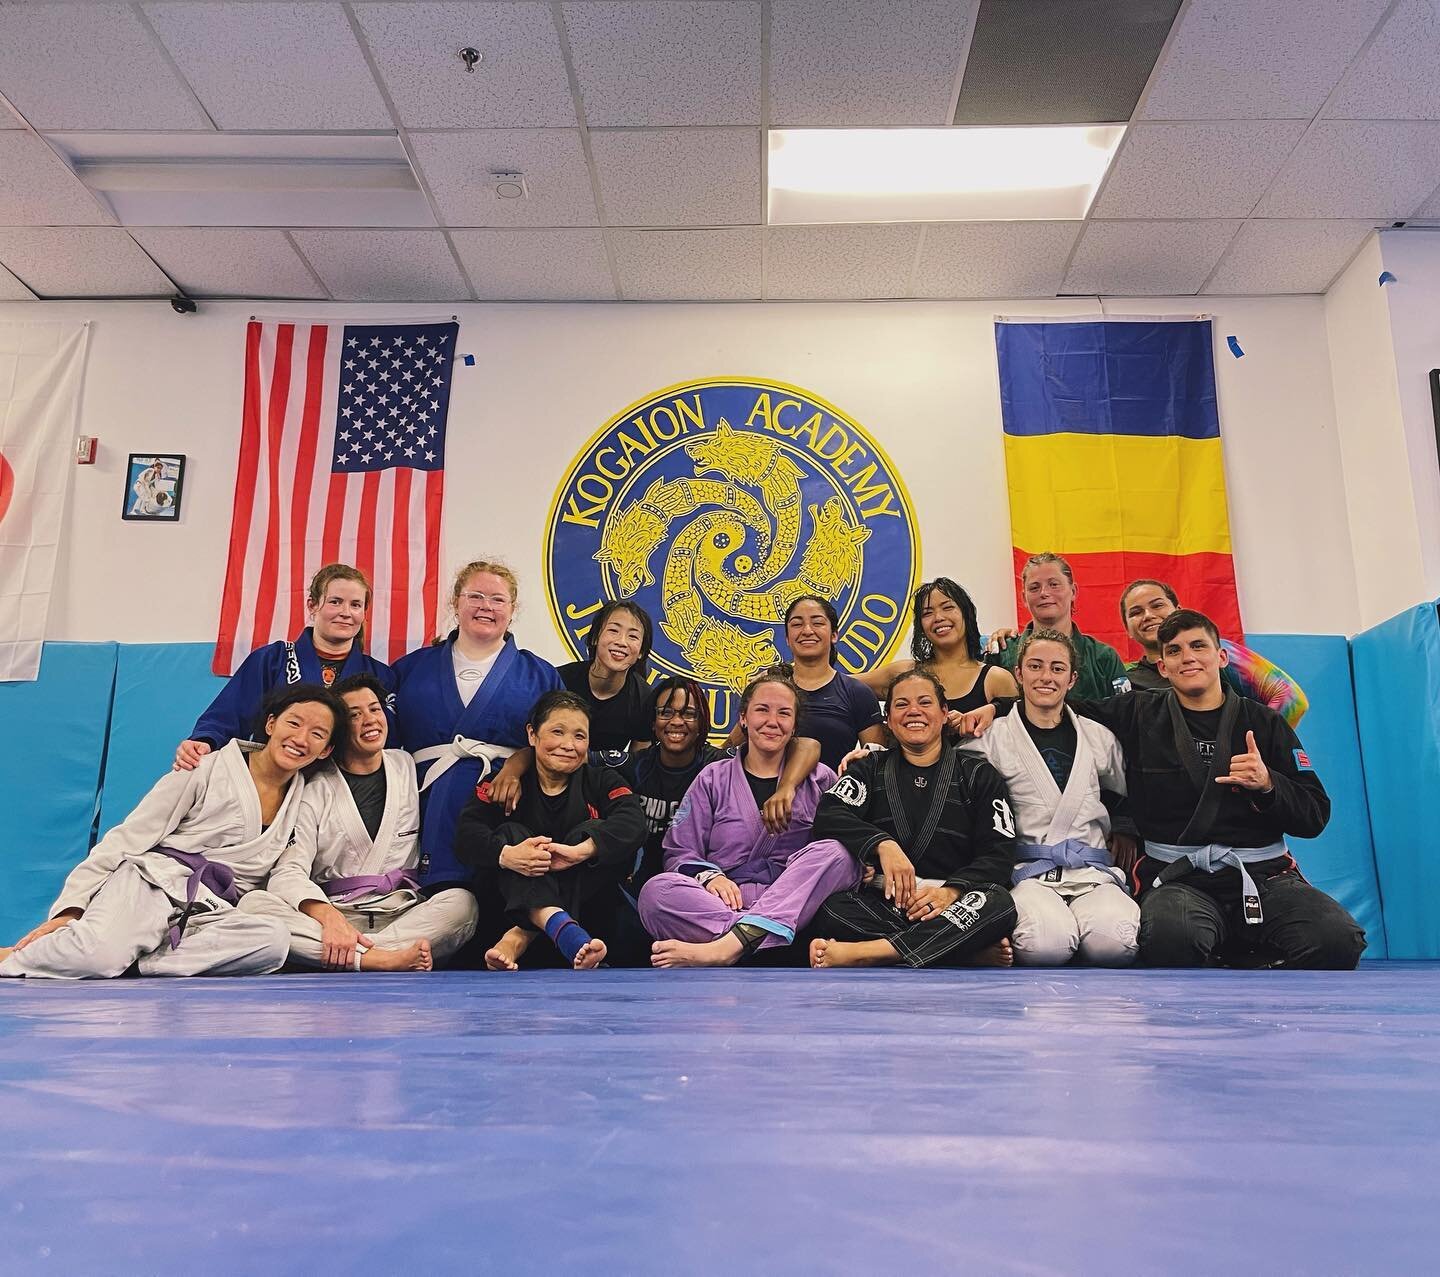 Another awesome women&rsquo;s open mat. We had visitors from as far as Winchester (1.5 hour drive), Norfolk (4 hours), and even Pasadena, CA (many hours). This happens EVERY Friday 7:30pm and Sunday 5:30pm. Contact @berimbozo if you&rsquo;re interest